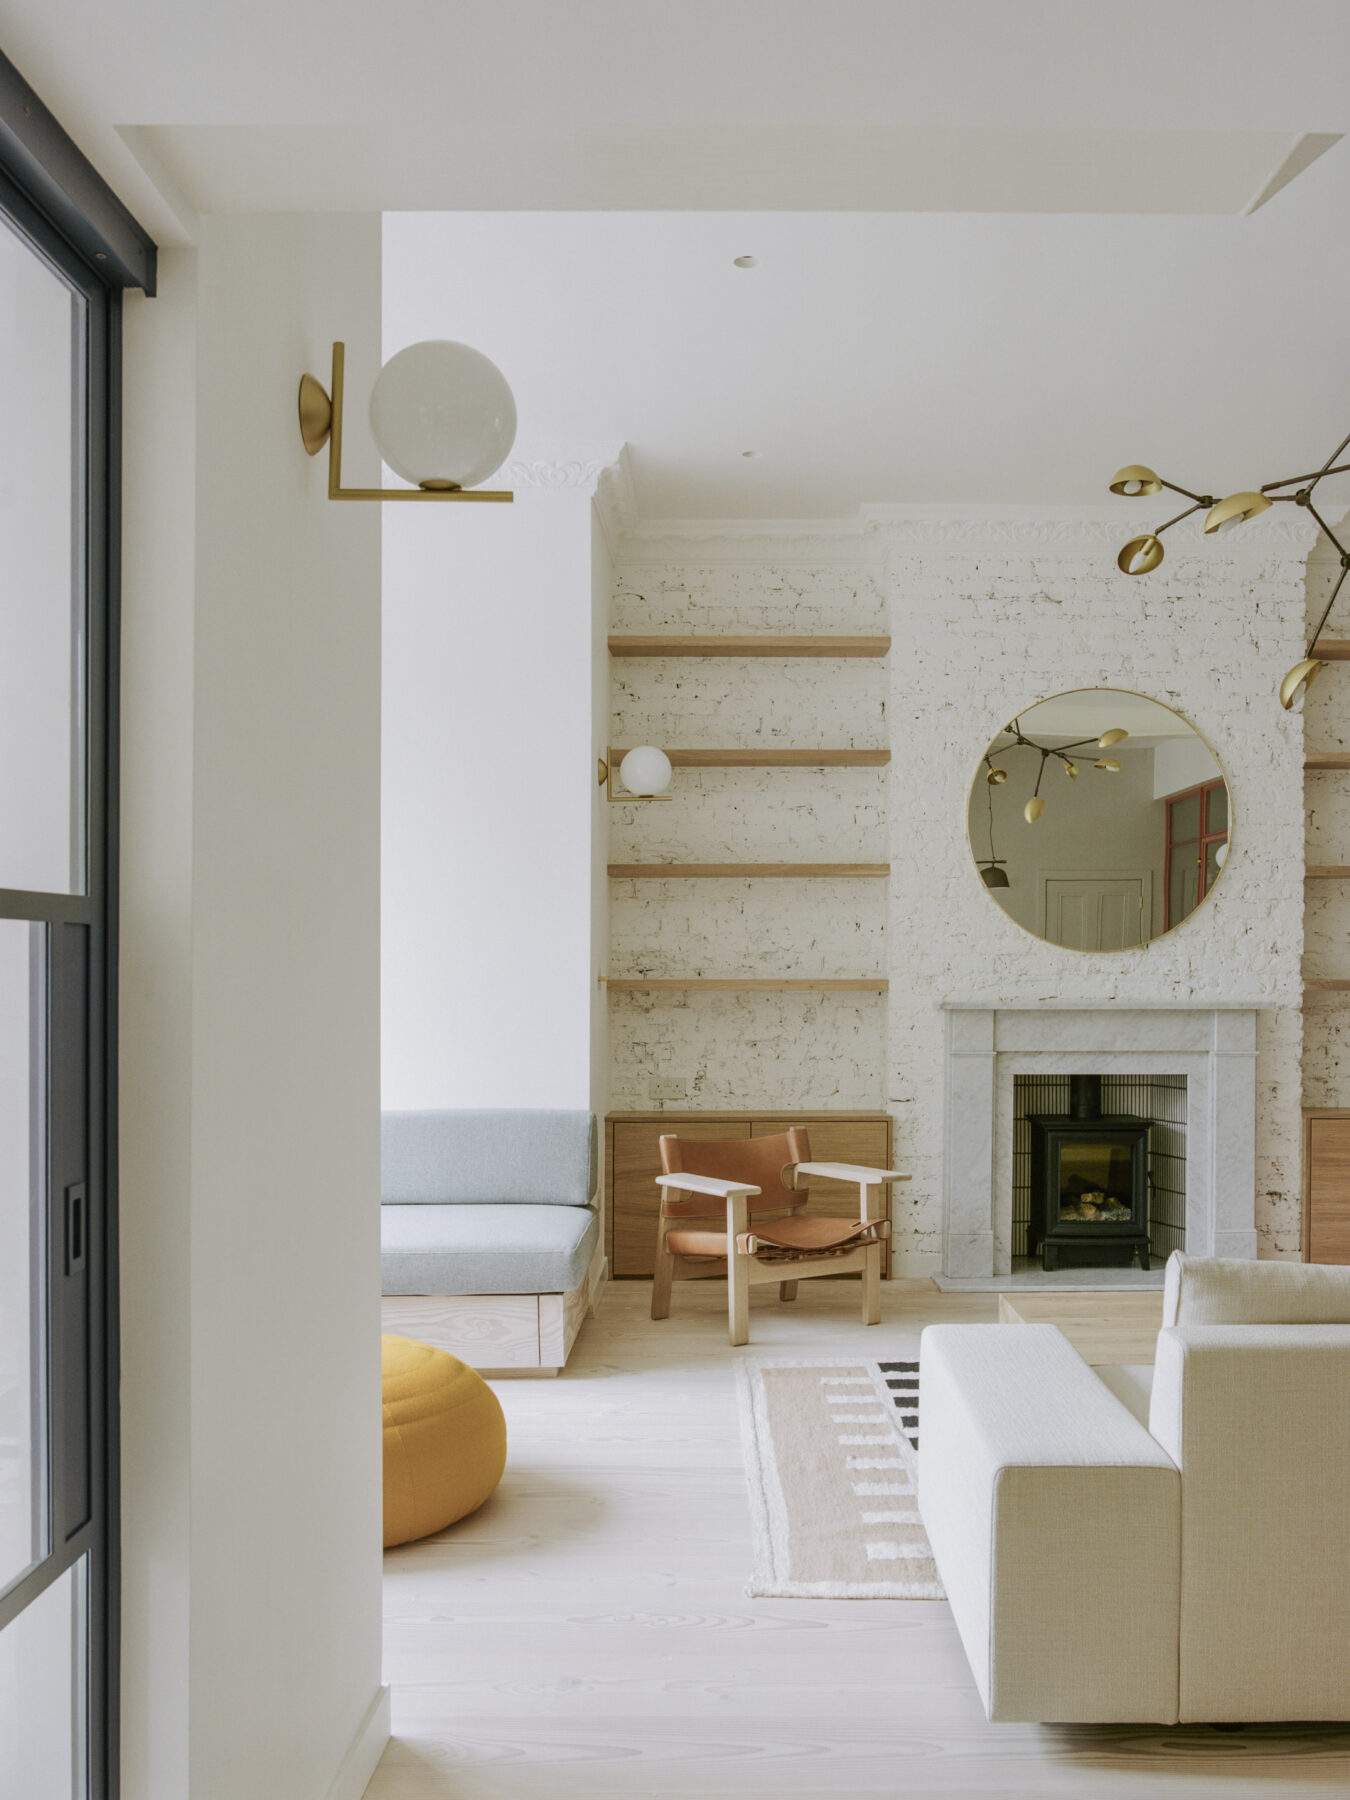 Archisearch Steele’s Road House - Transformation of a Victorian-era terrace house in West London by Neiheiser Argyros